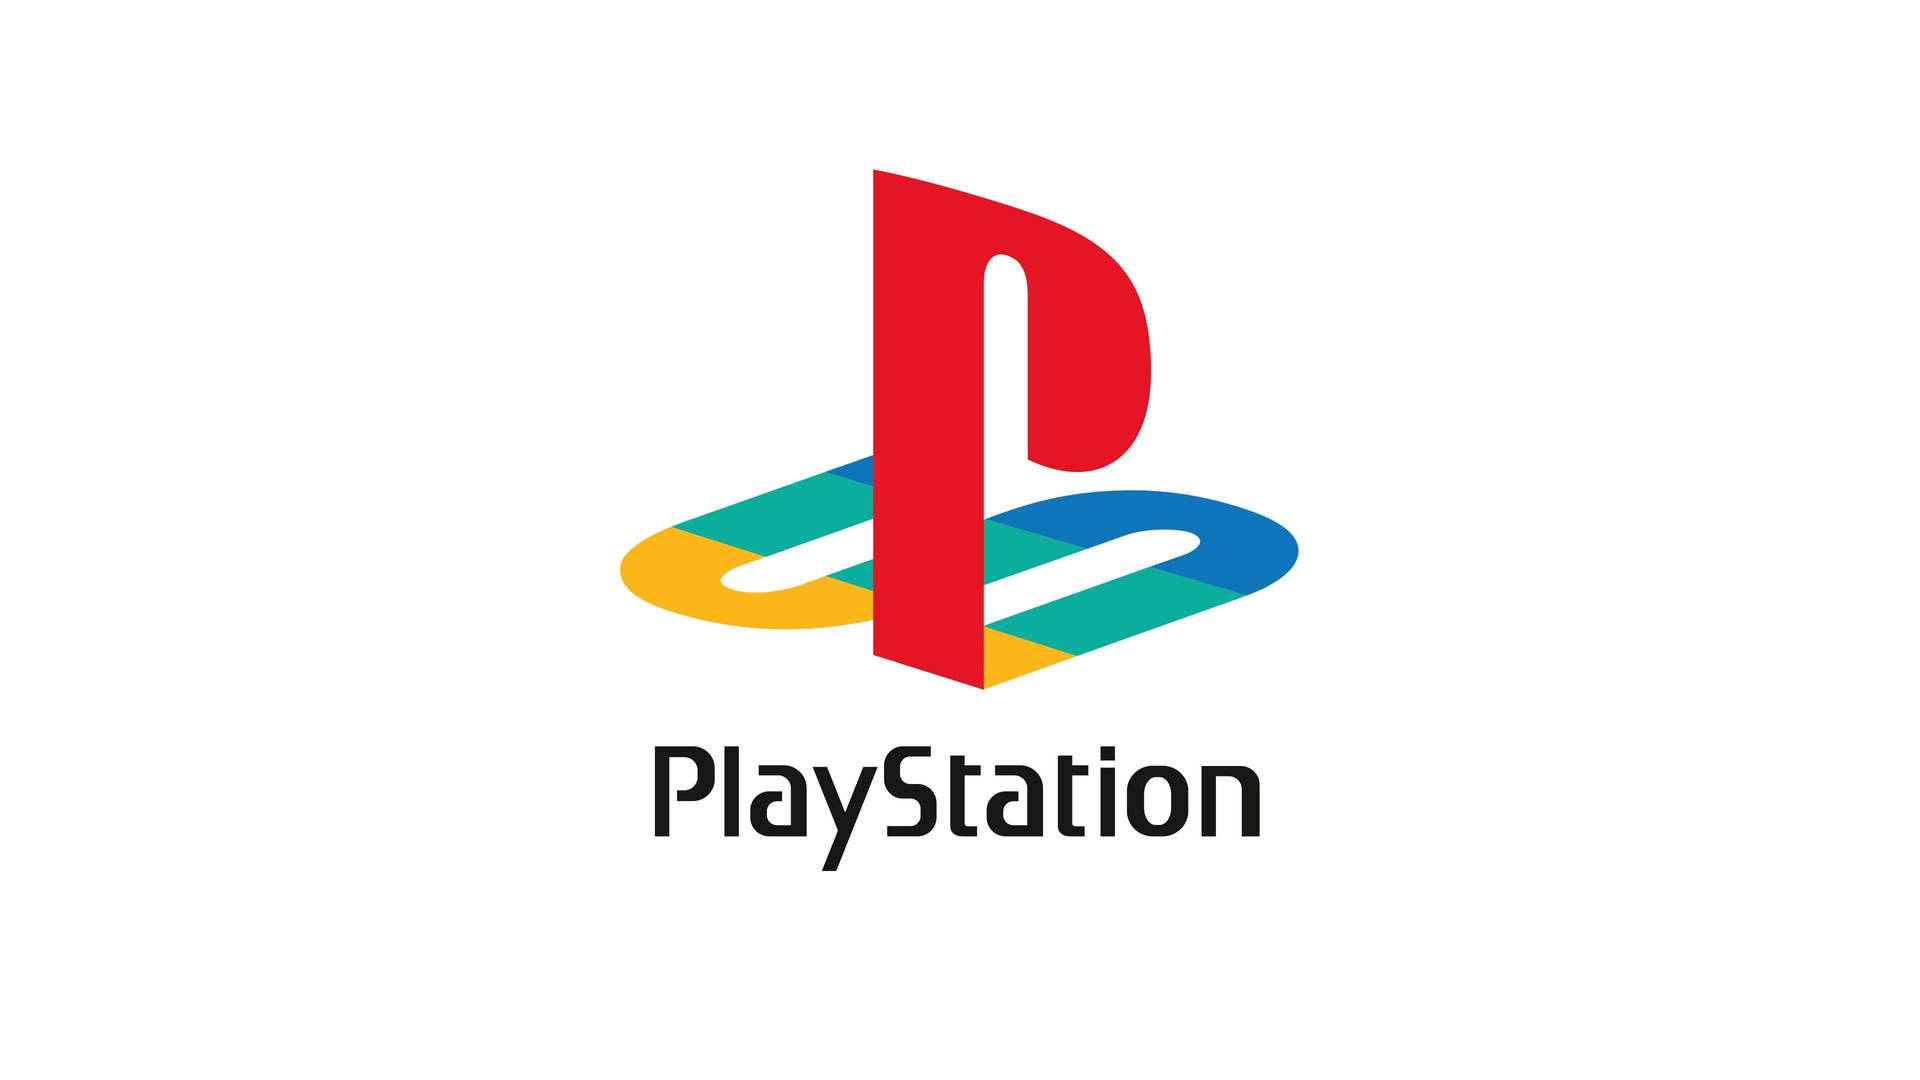 Experience all the nostalgia of the original Playstation. Wallpaper